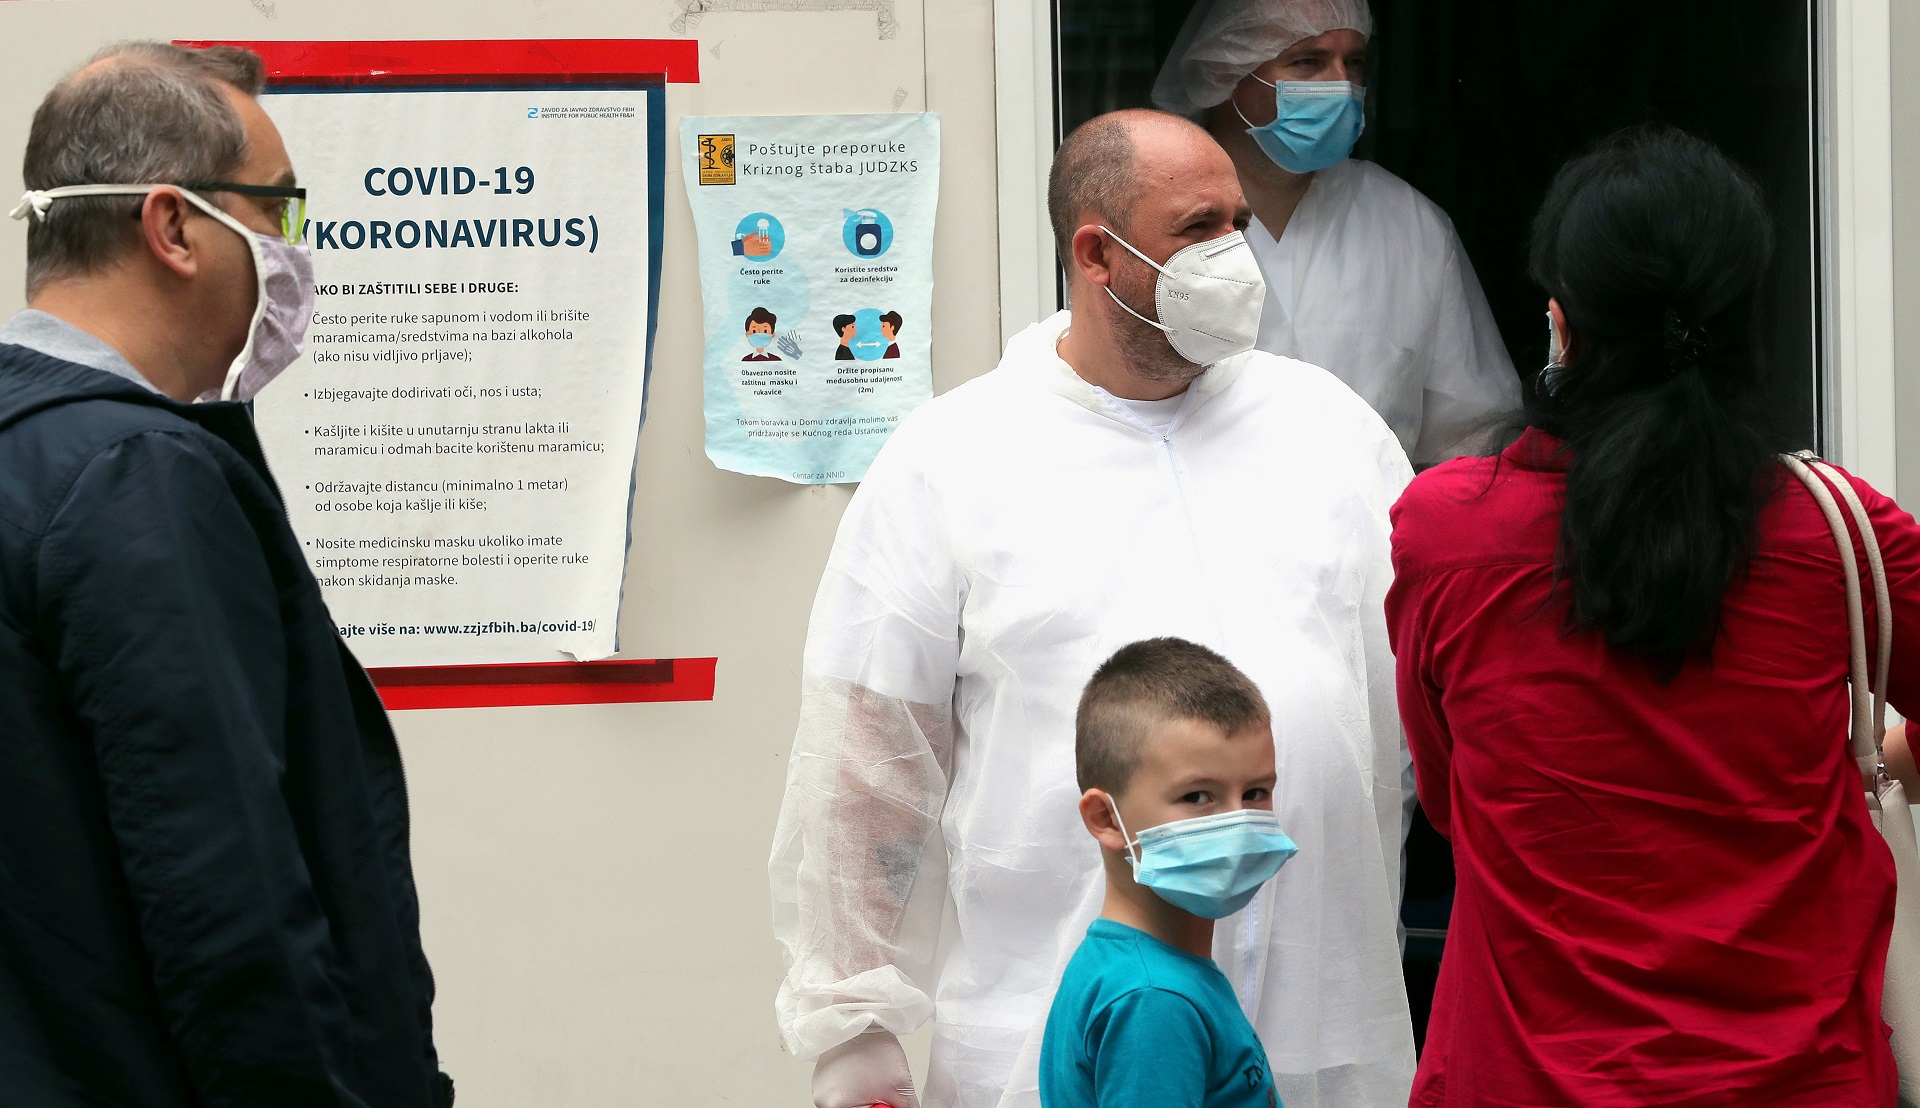 epa08486841 A medical staff attends to people arriving for coronavirus tests, at a hospital in Sarajevo, Bosnia and Herzegovina, 15 June 2020. Countries around the world are taking increased measures to stem the widespread of the SARS-CoV-2 coronavirus which causes the Covid-19 disease.  EPA/FEHIM DEMIR